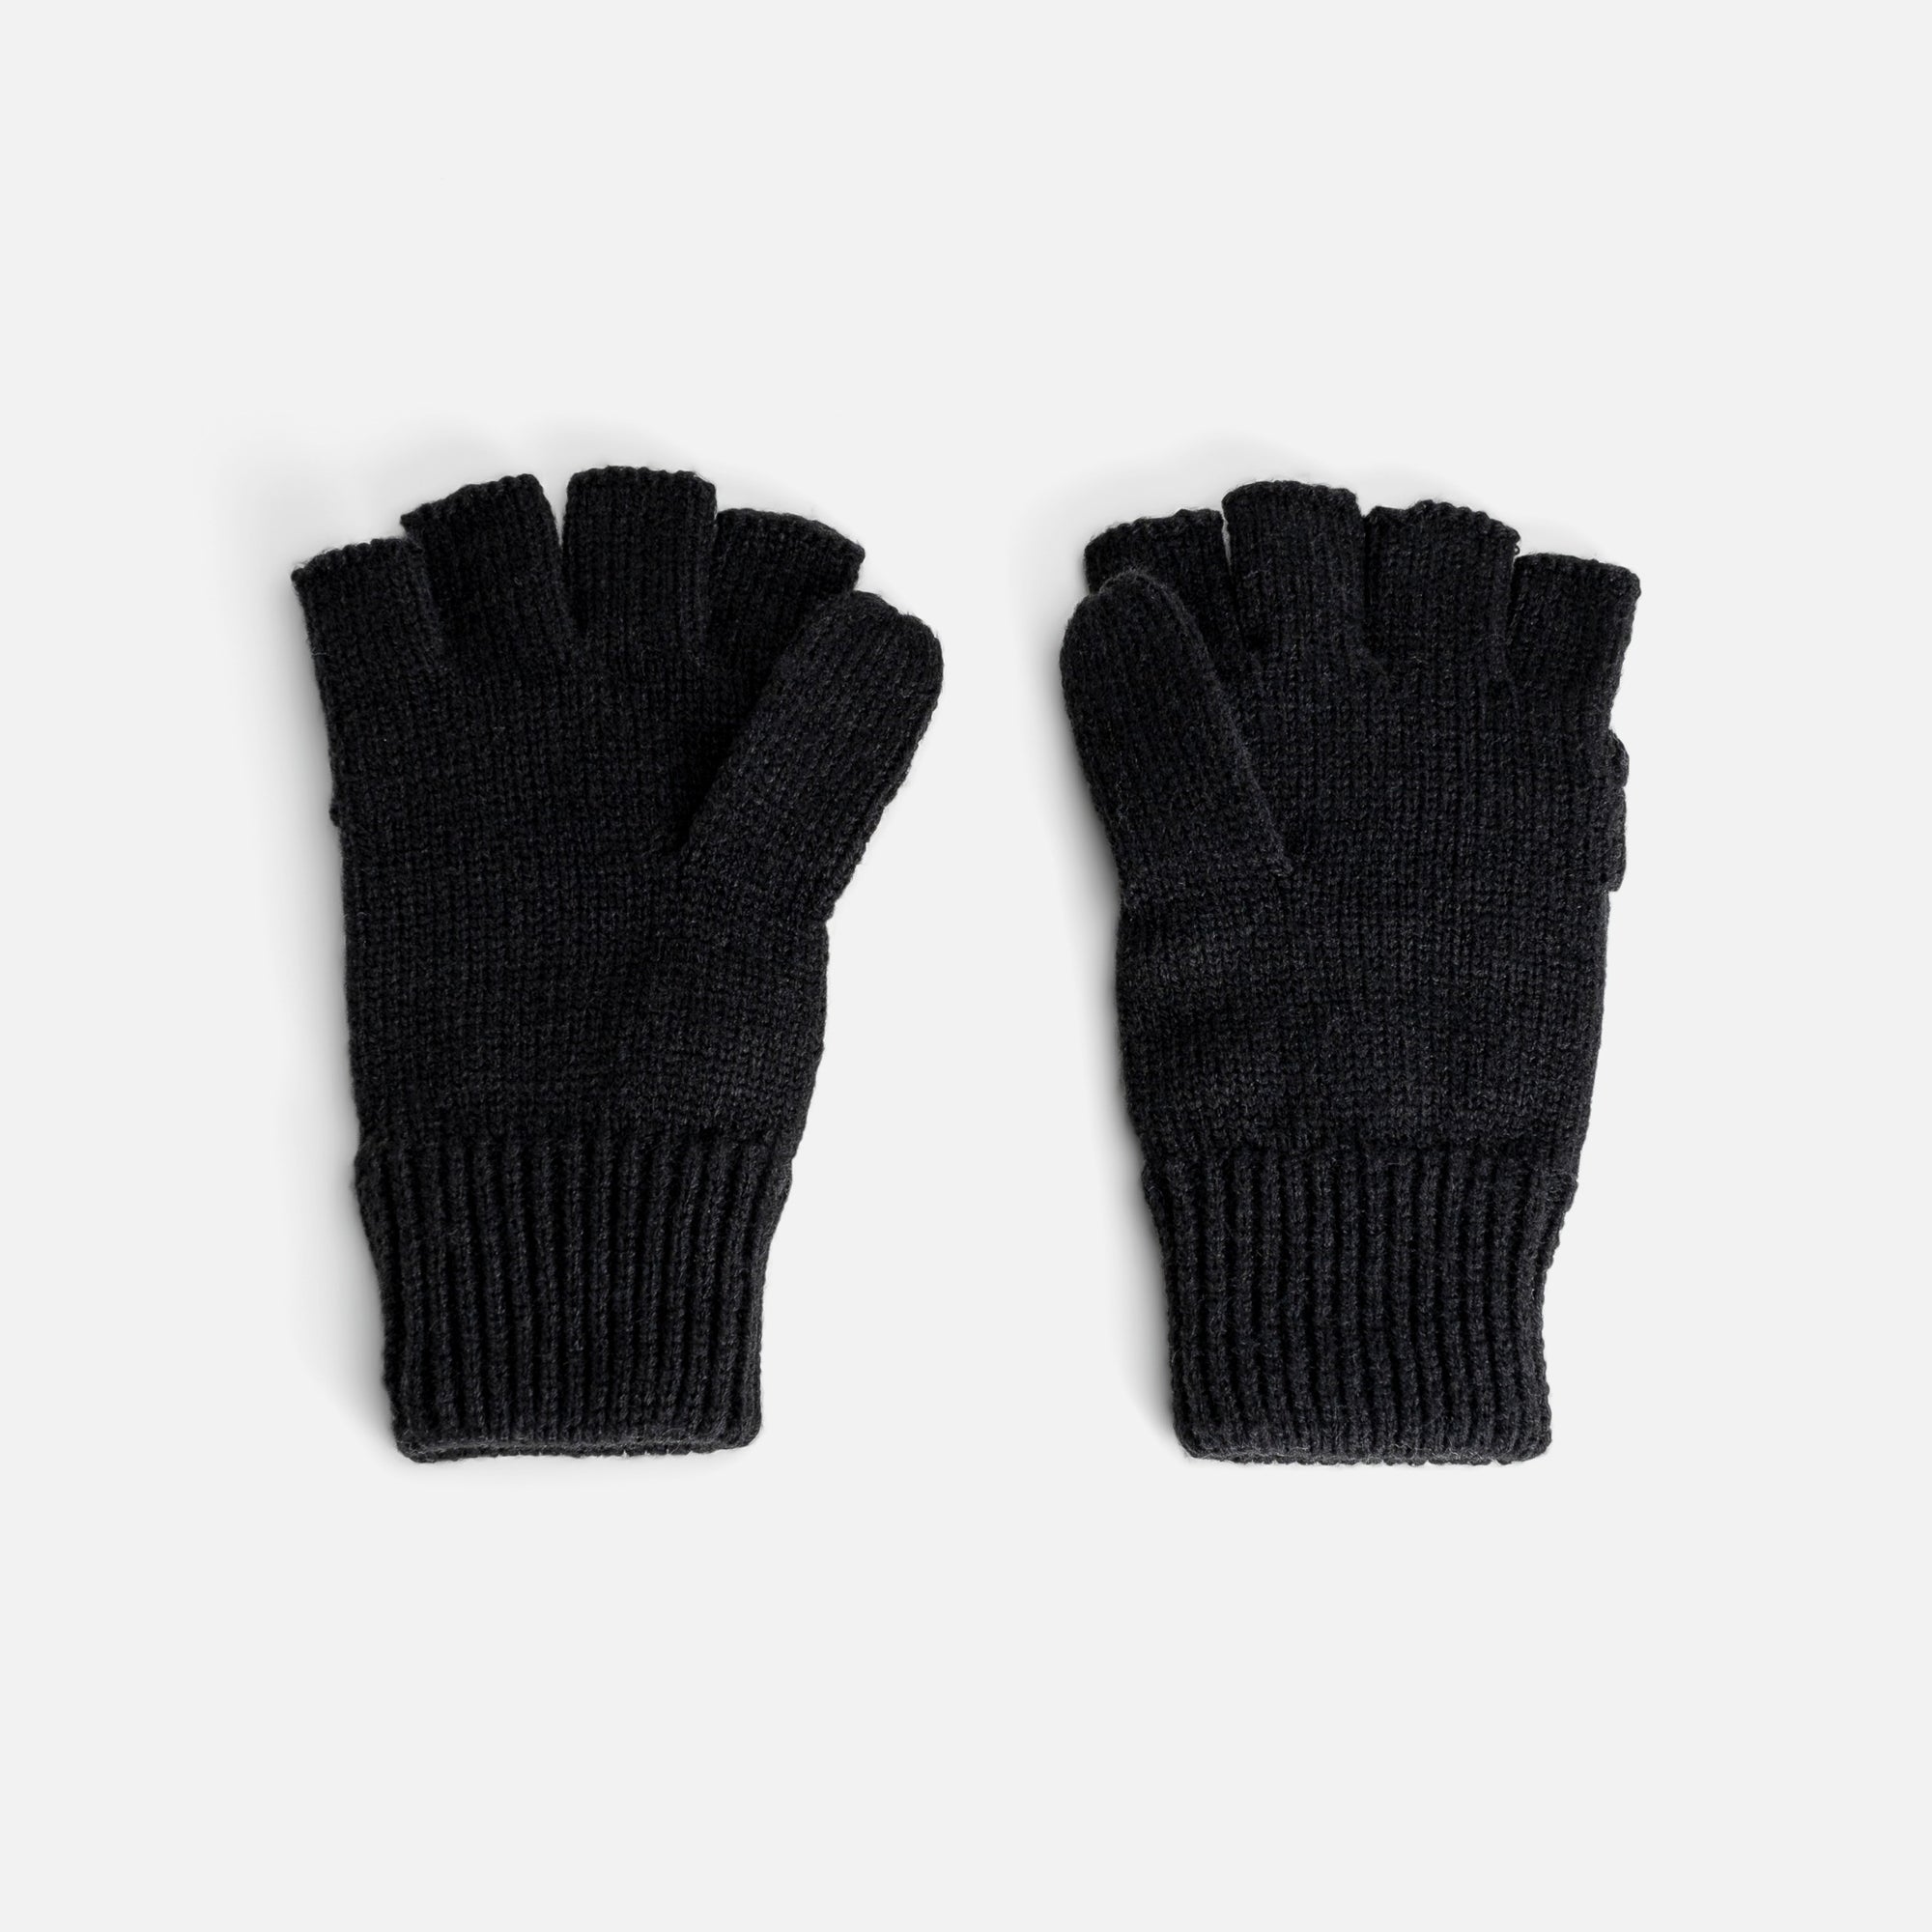 Black convertible gloves with removable fingertip flap